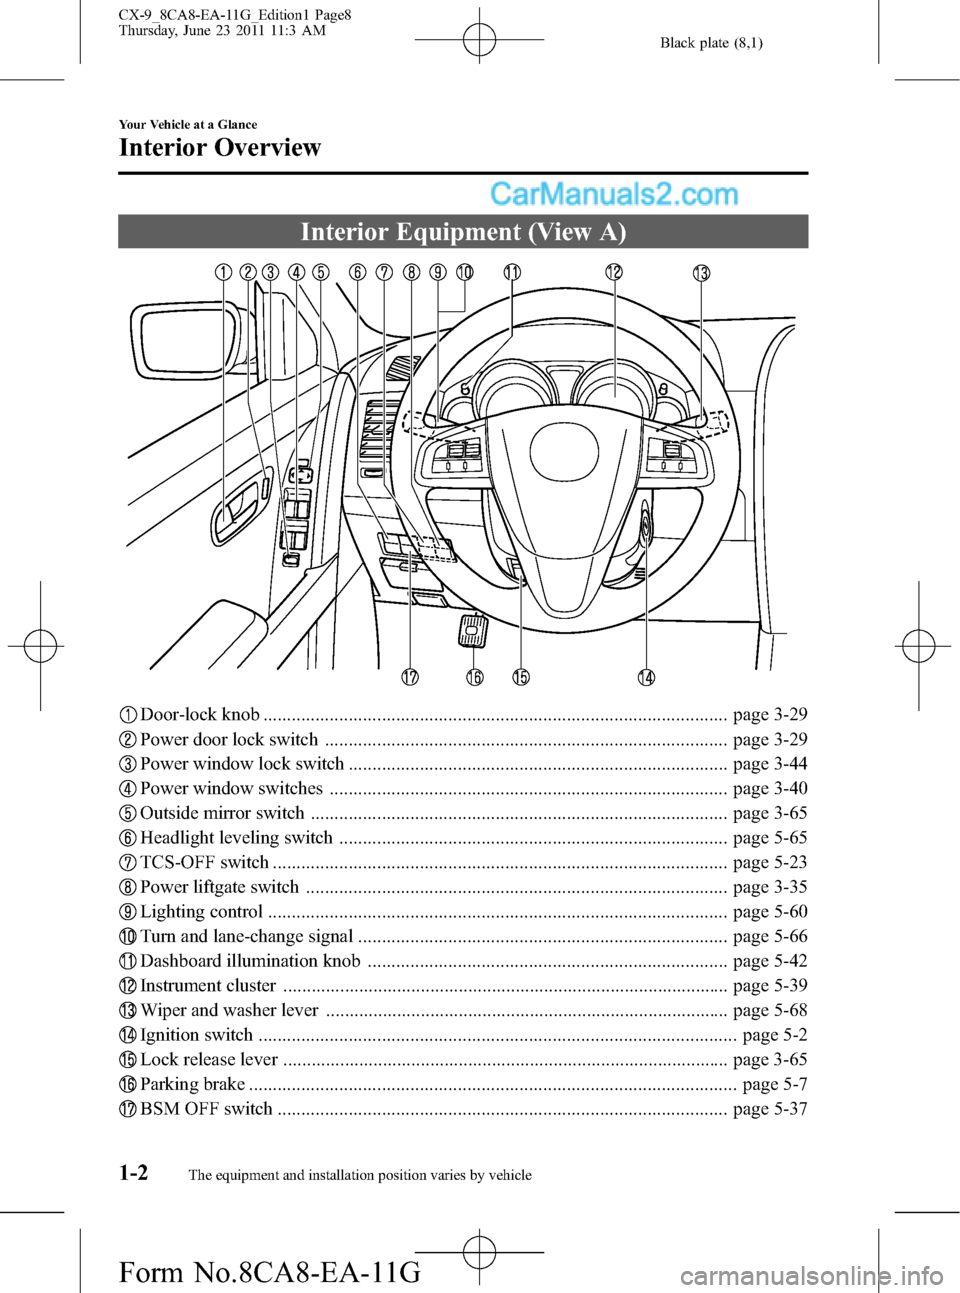 MAZDA MODEL CX-9 2012  Owners Manual (in English) Black plate (8,1)
Interior Equipment (View A)
Door-lock knob .................................................................................................. page 3-29
Power door lock switch .......